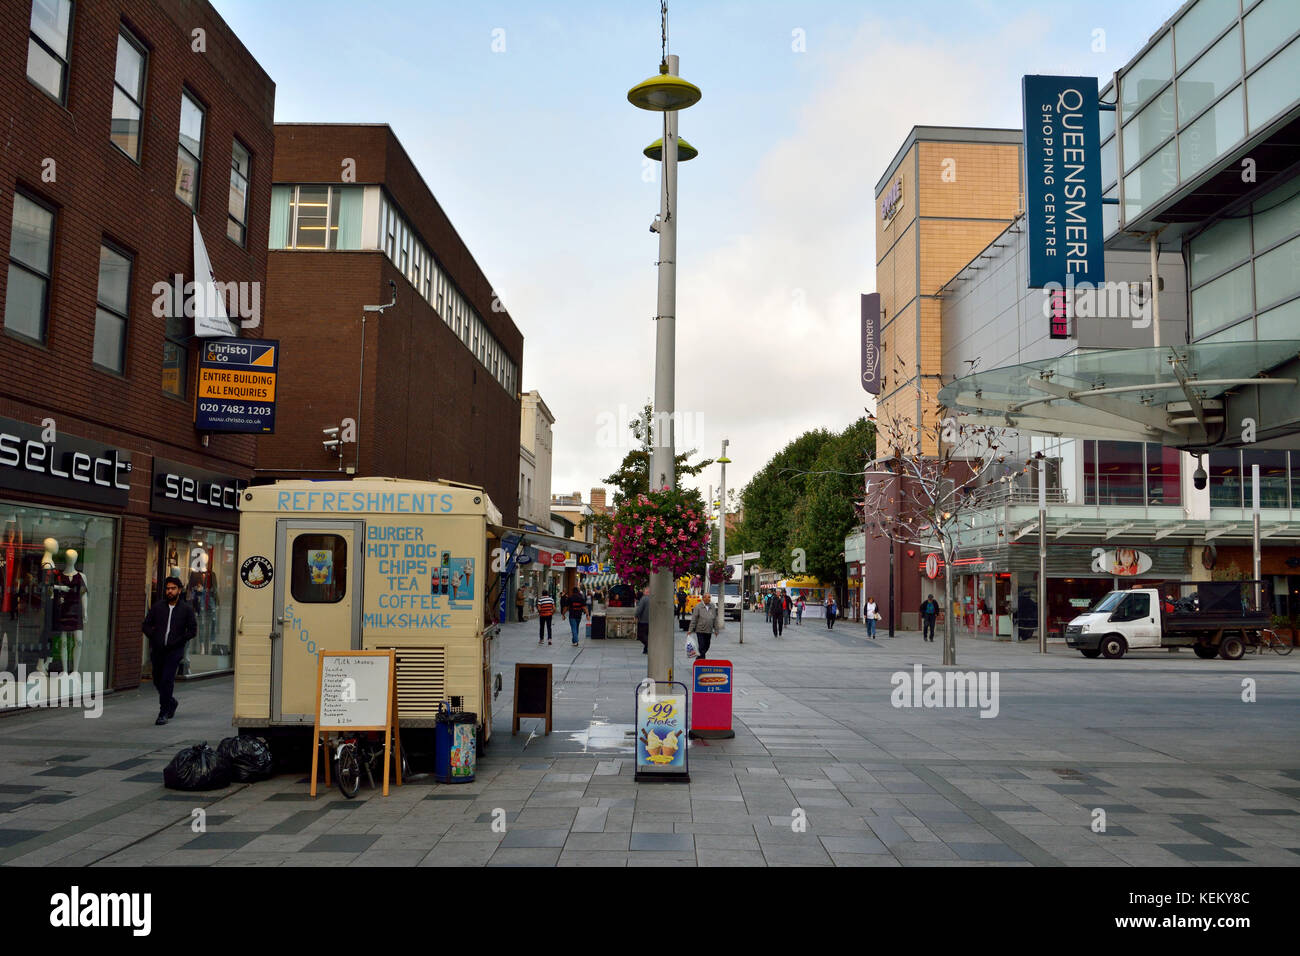 Slough, United Kingdom - September 7, 2017. View of High Street in Slough, with historic buildings, commercial properties. Stock Photo